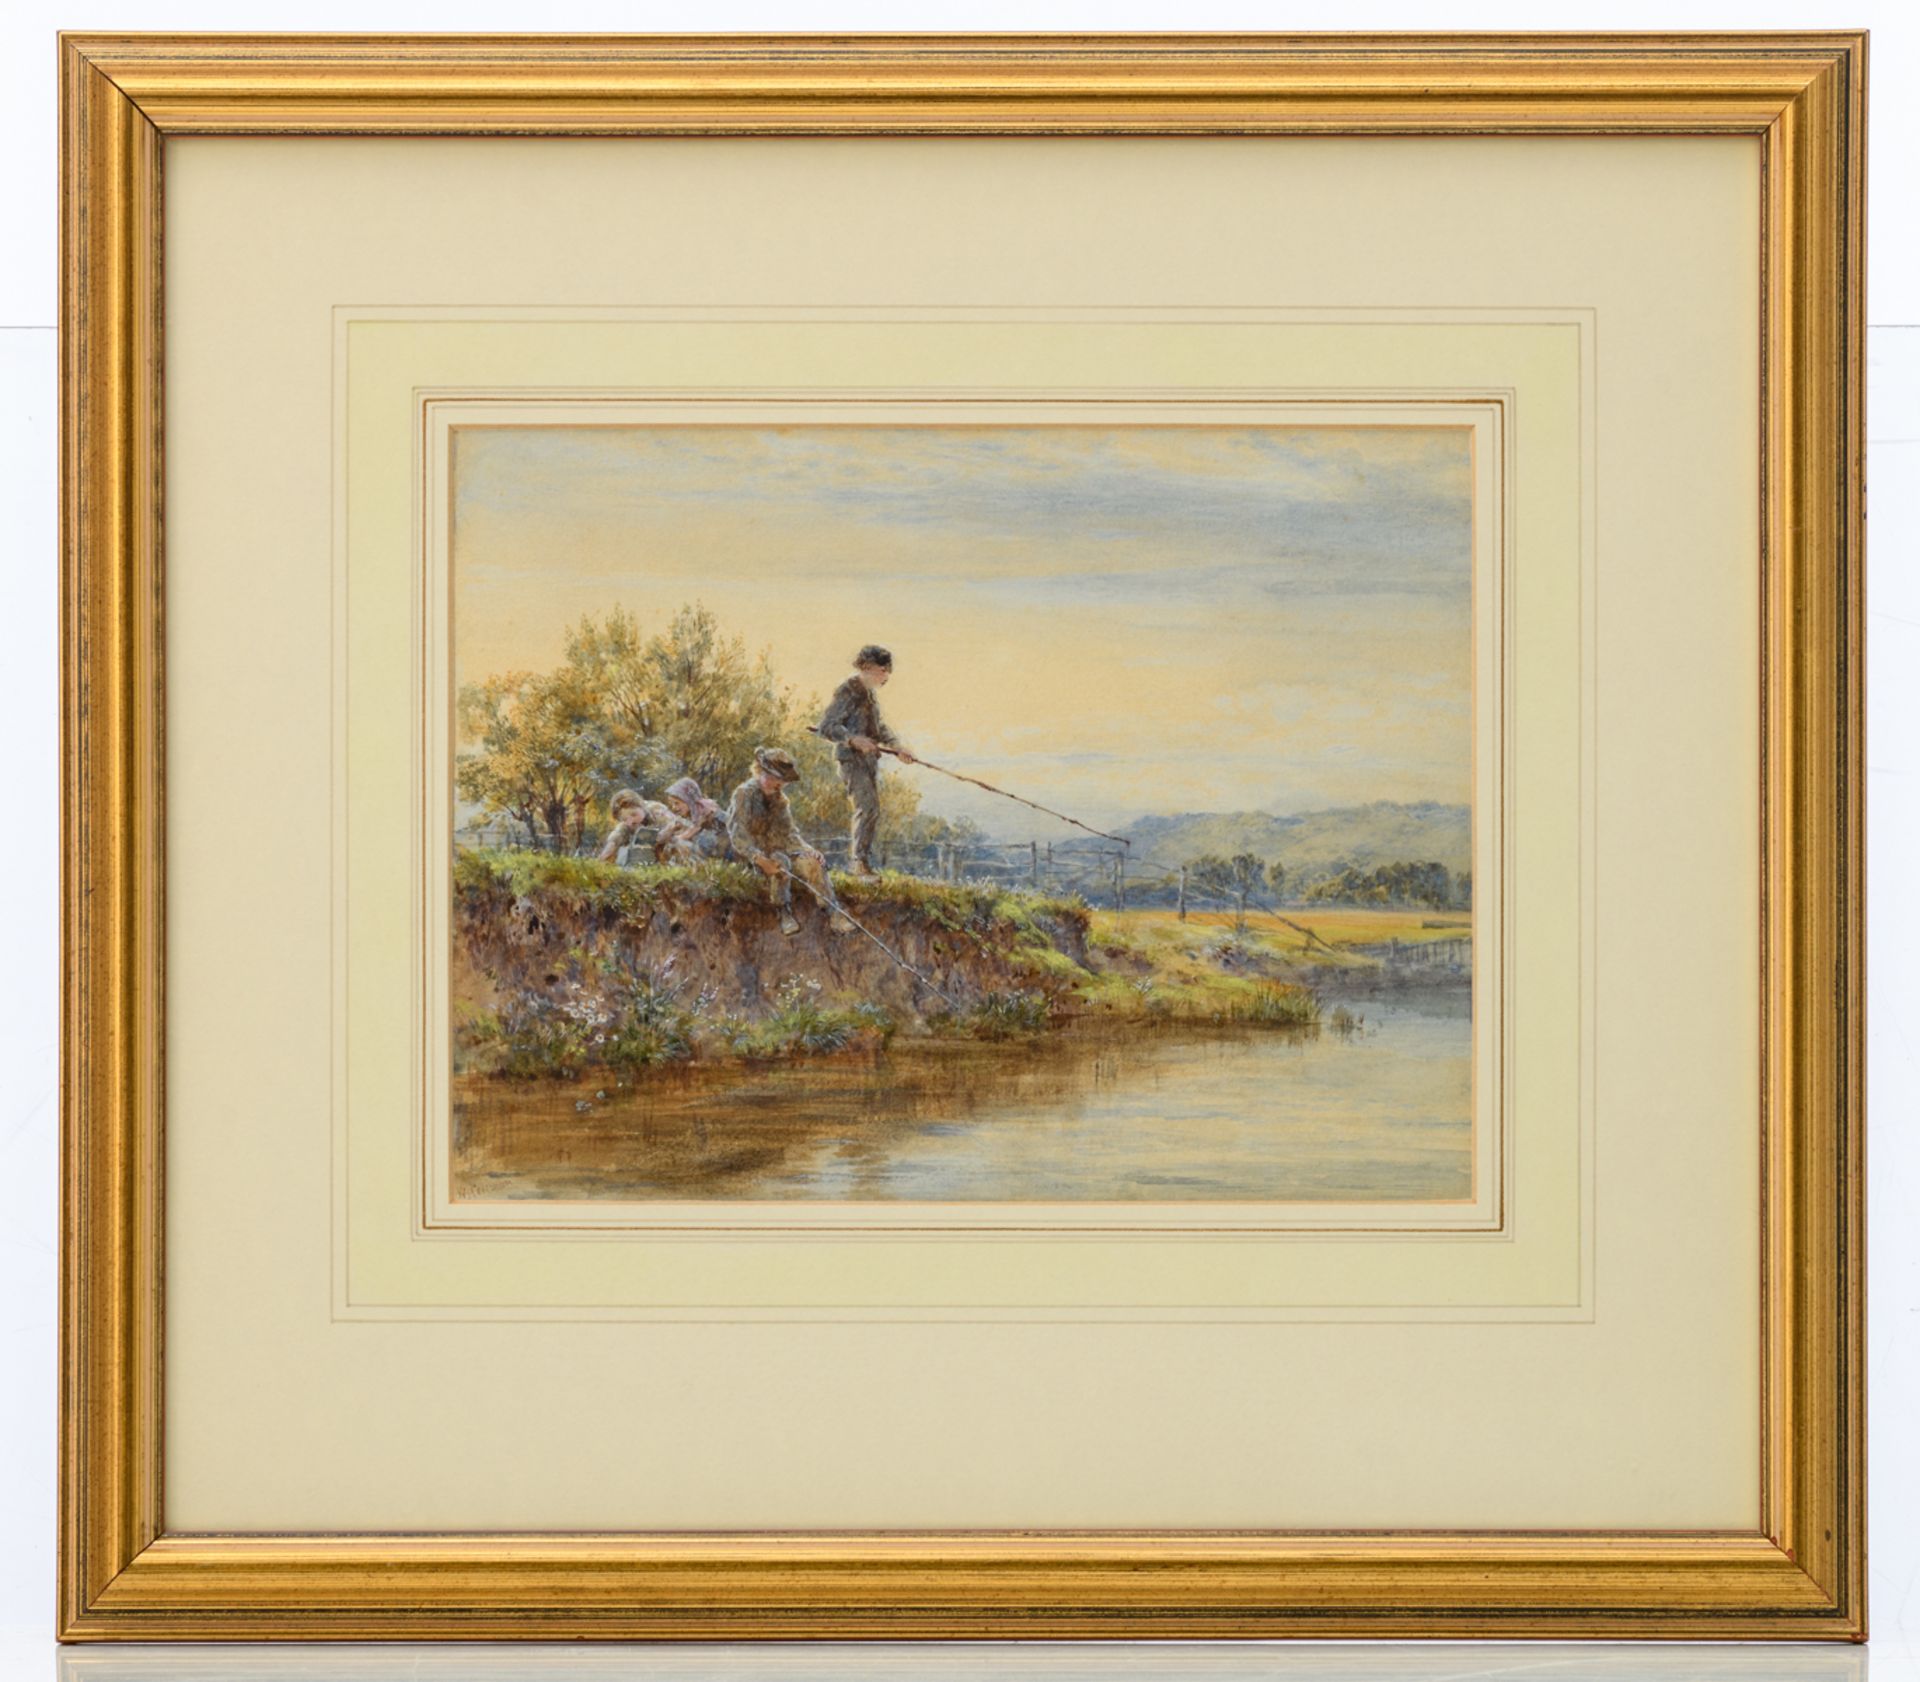 Coleman W. St., 'Children fishing at a River Bank', watercolour, 19 x 25 cm - Image 2 of 4